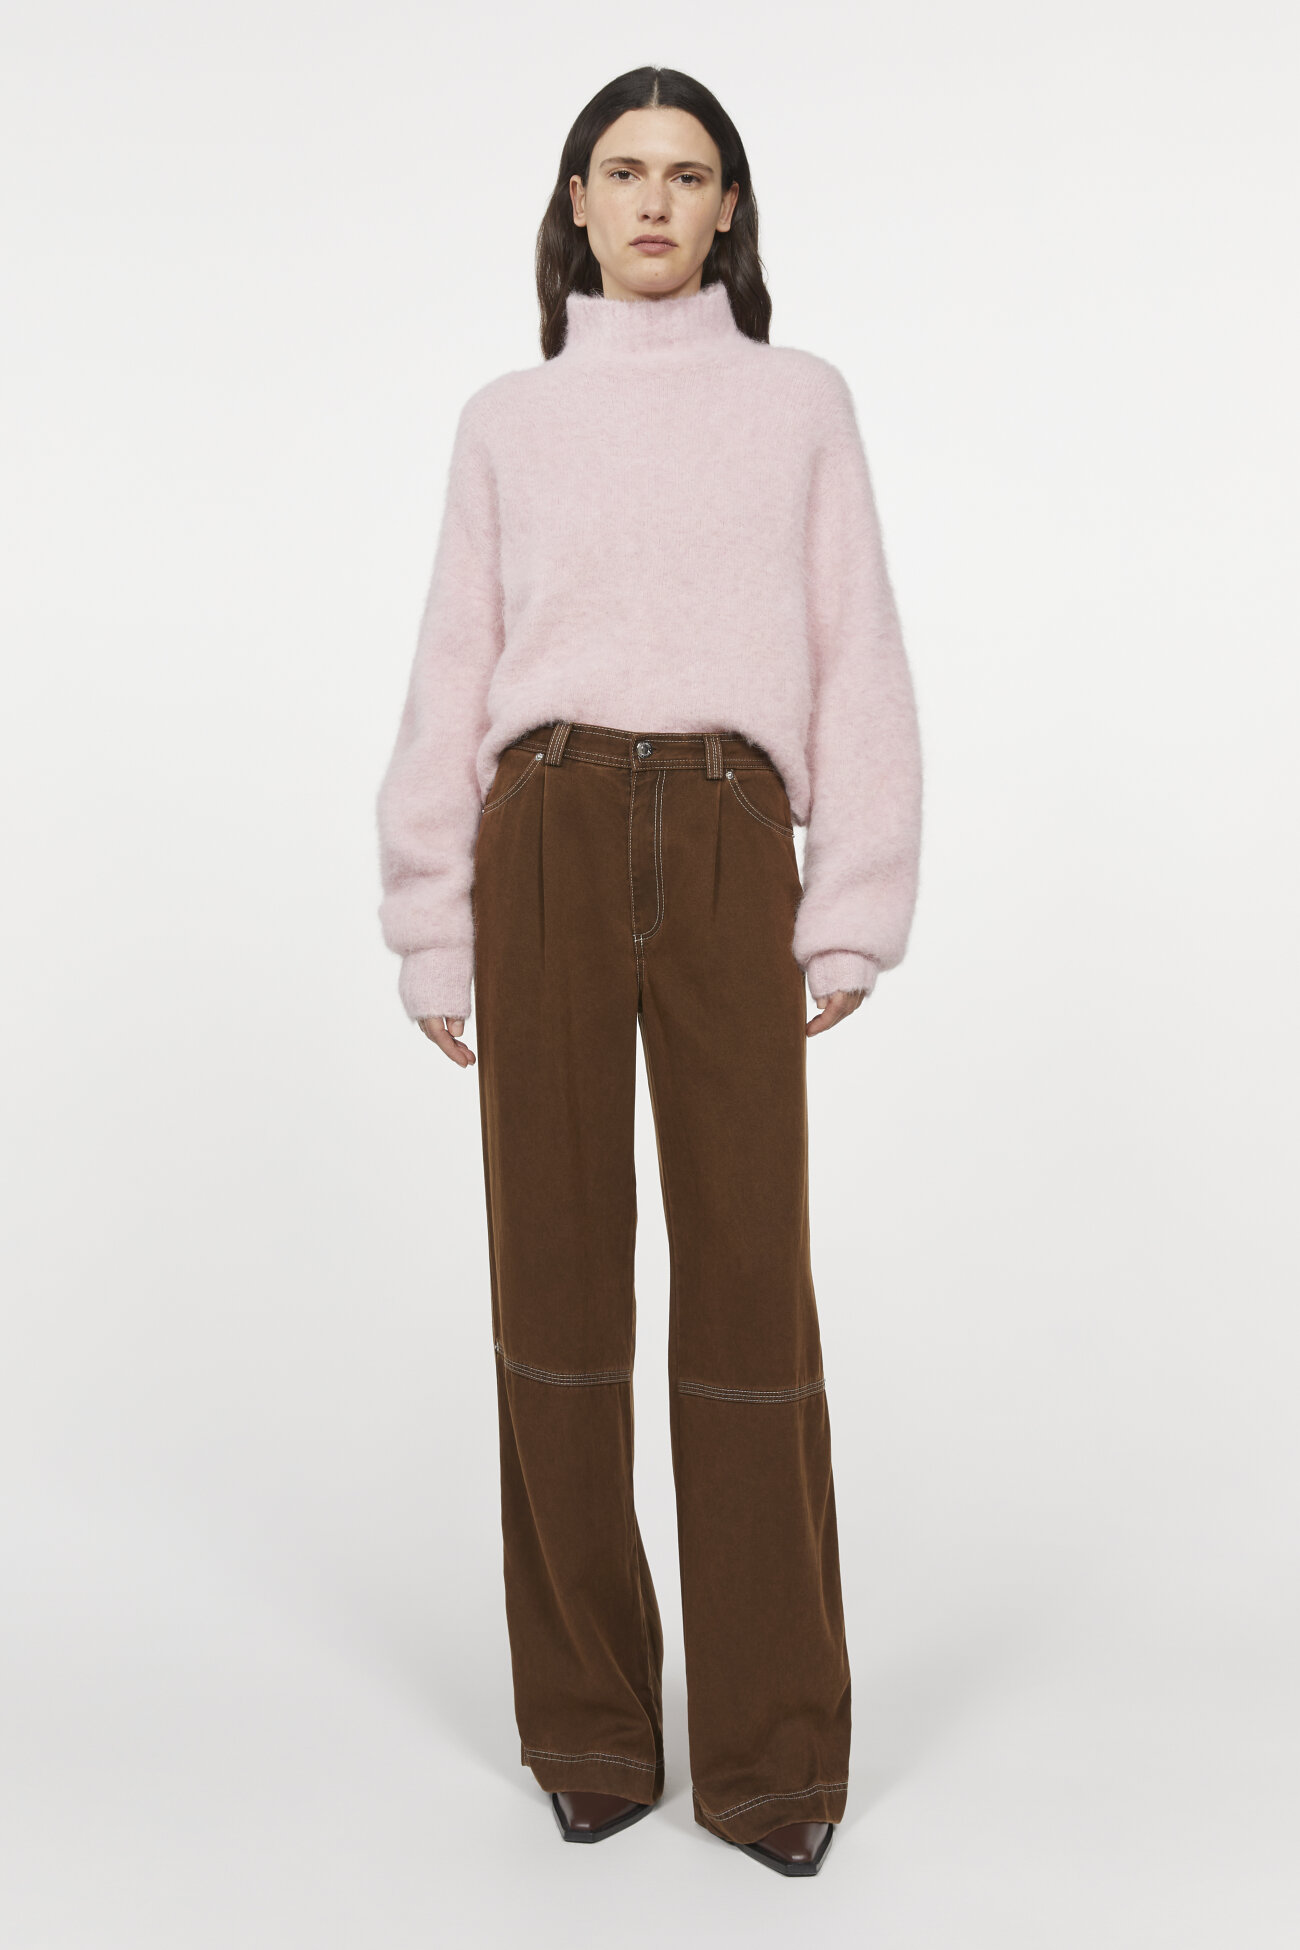 Eileen ranch cotton pants | Rodebjer.com